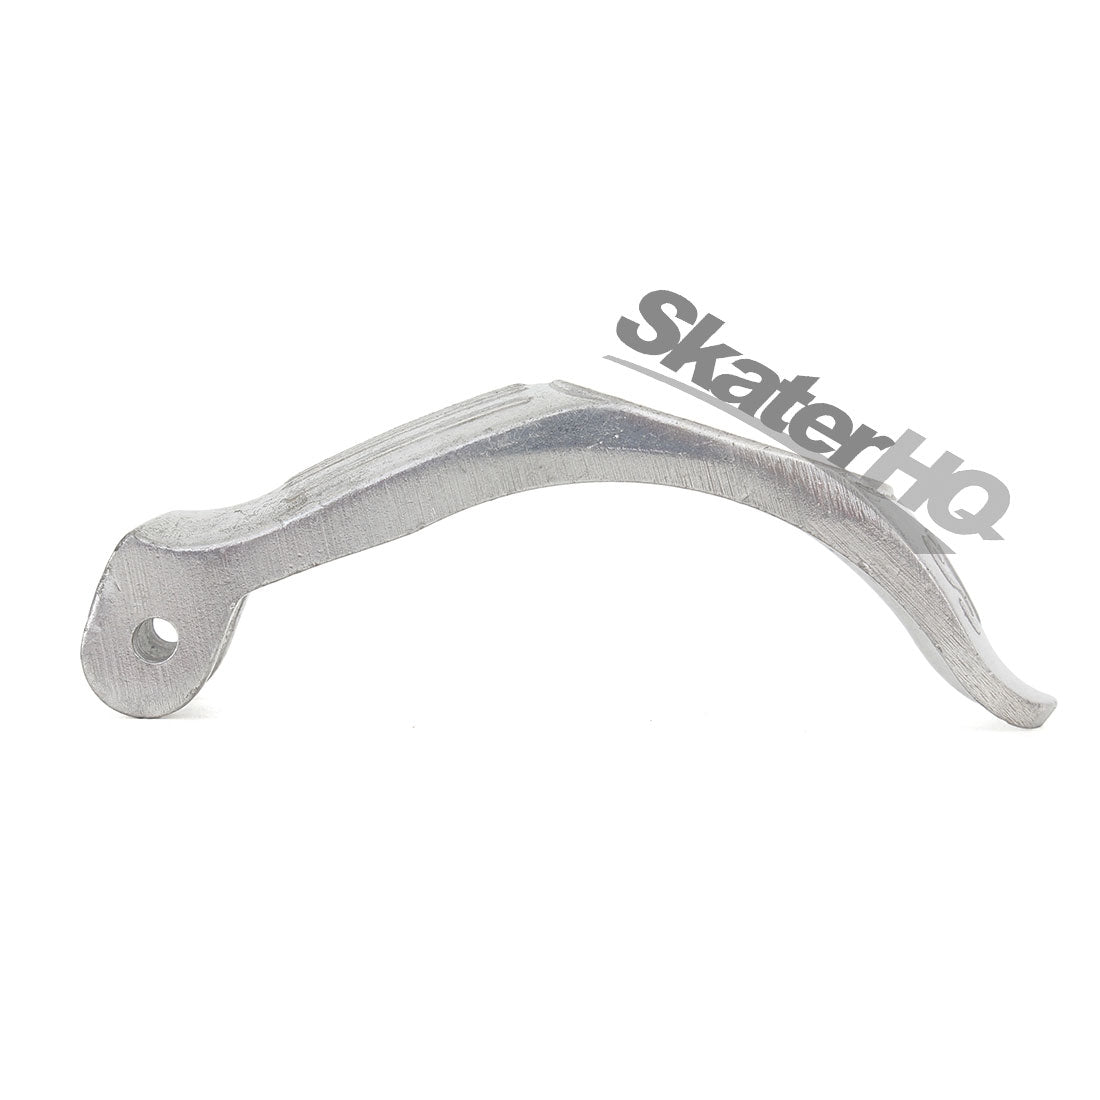 Generic Old-Style Scooter Brake - Polished Scooter Hardware and Parts